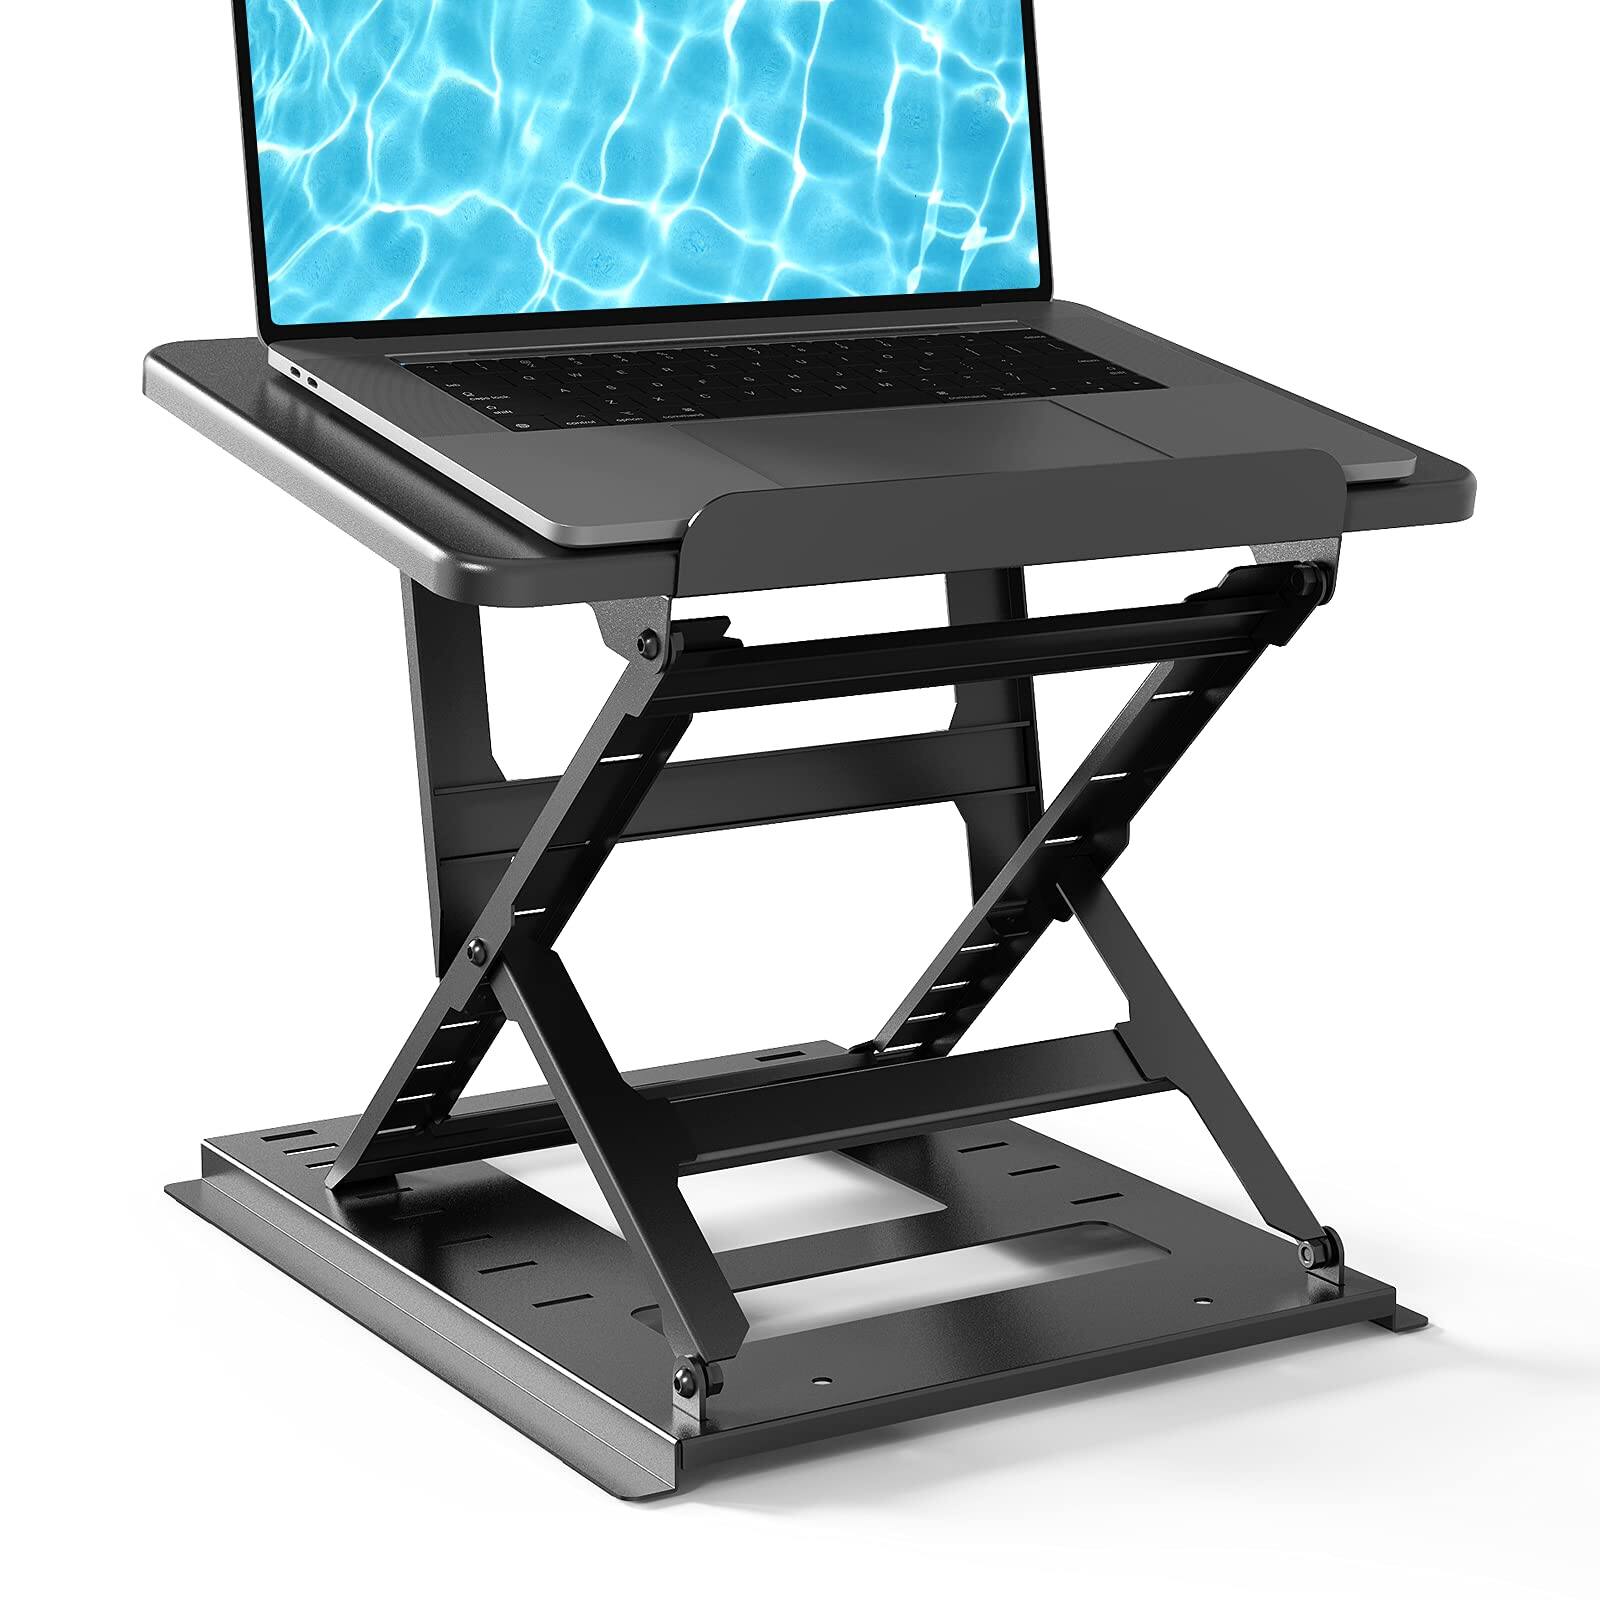 Huanuo Adjustable Laptop Stand with 9 Adjustable Angles for $18.99 + Free Shipping w/ Prime or $25+